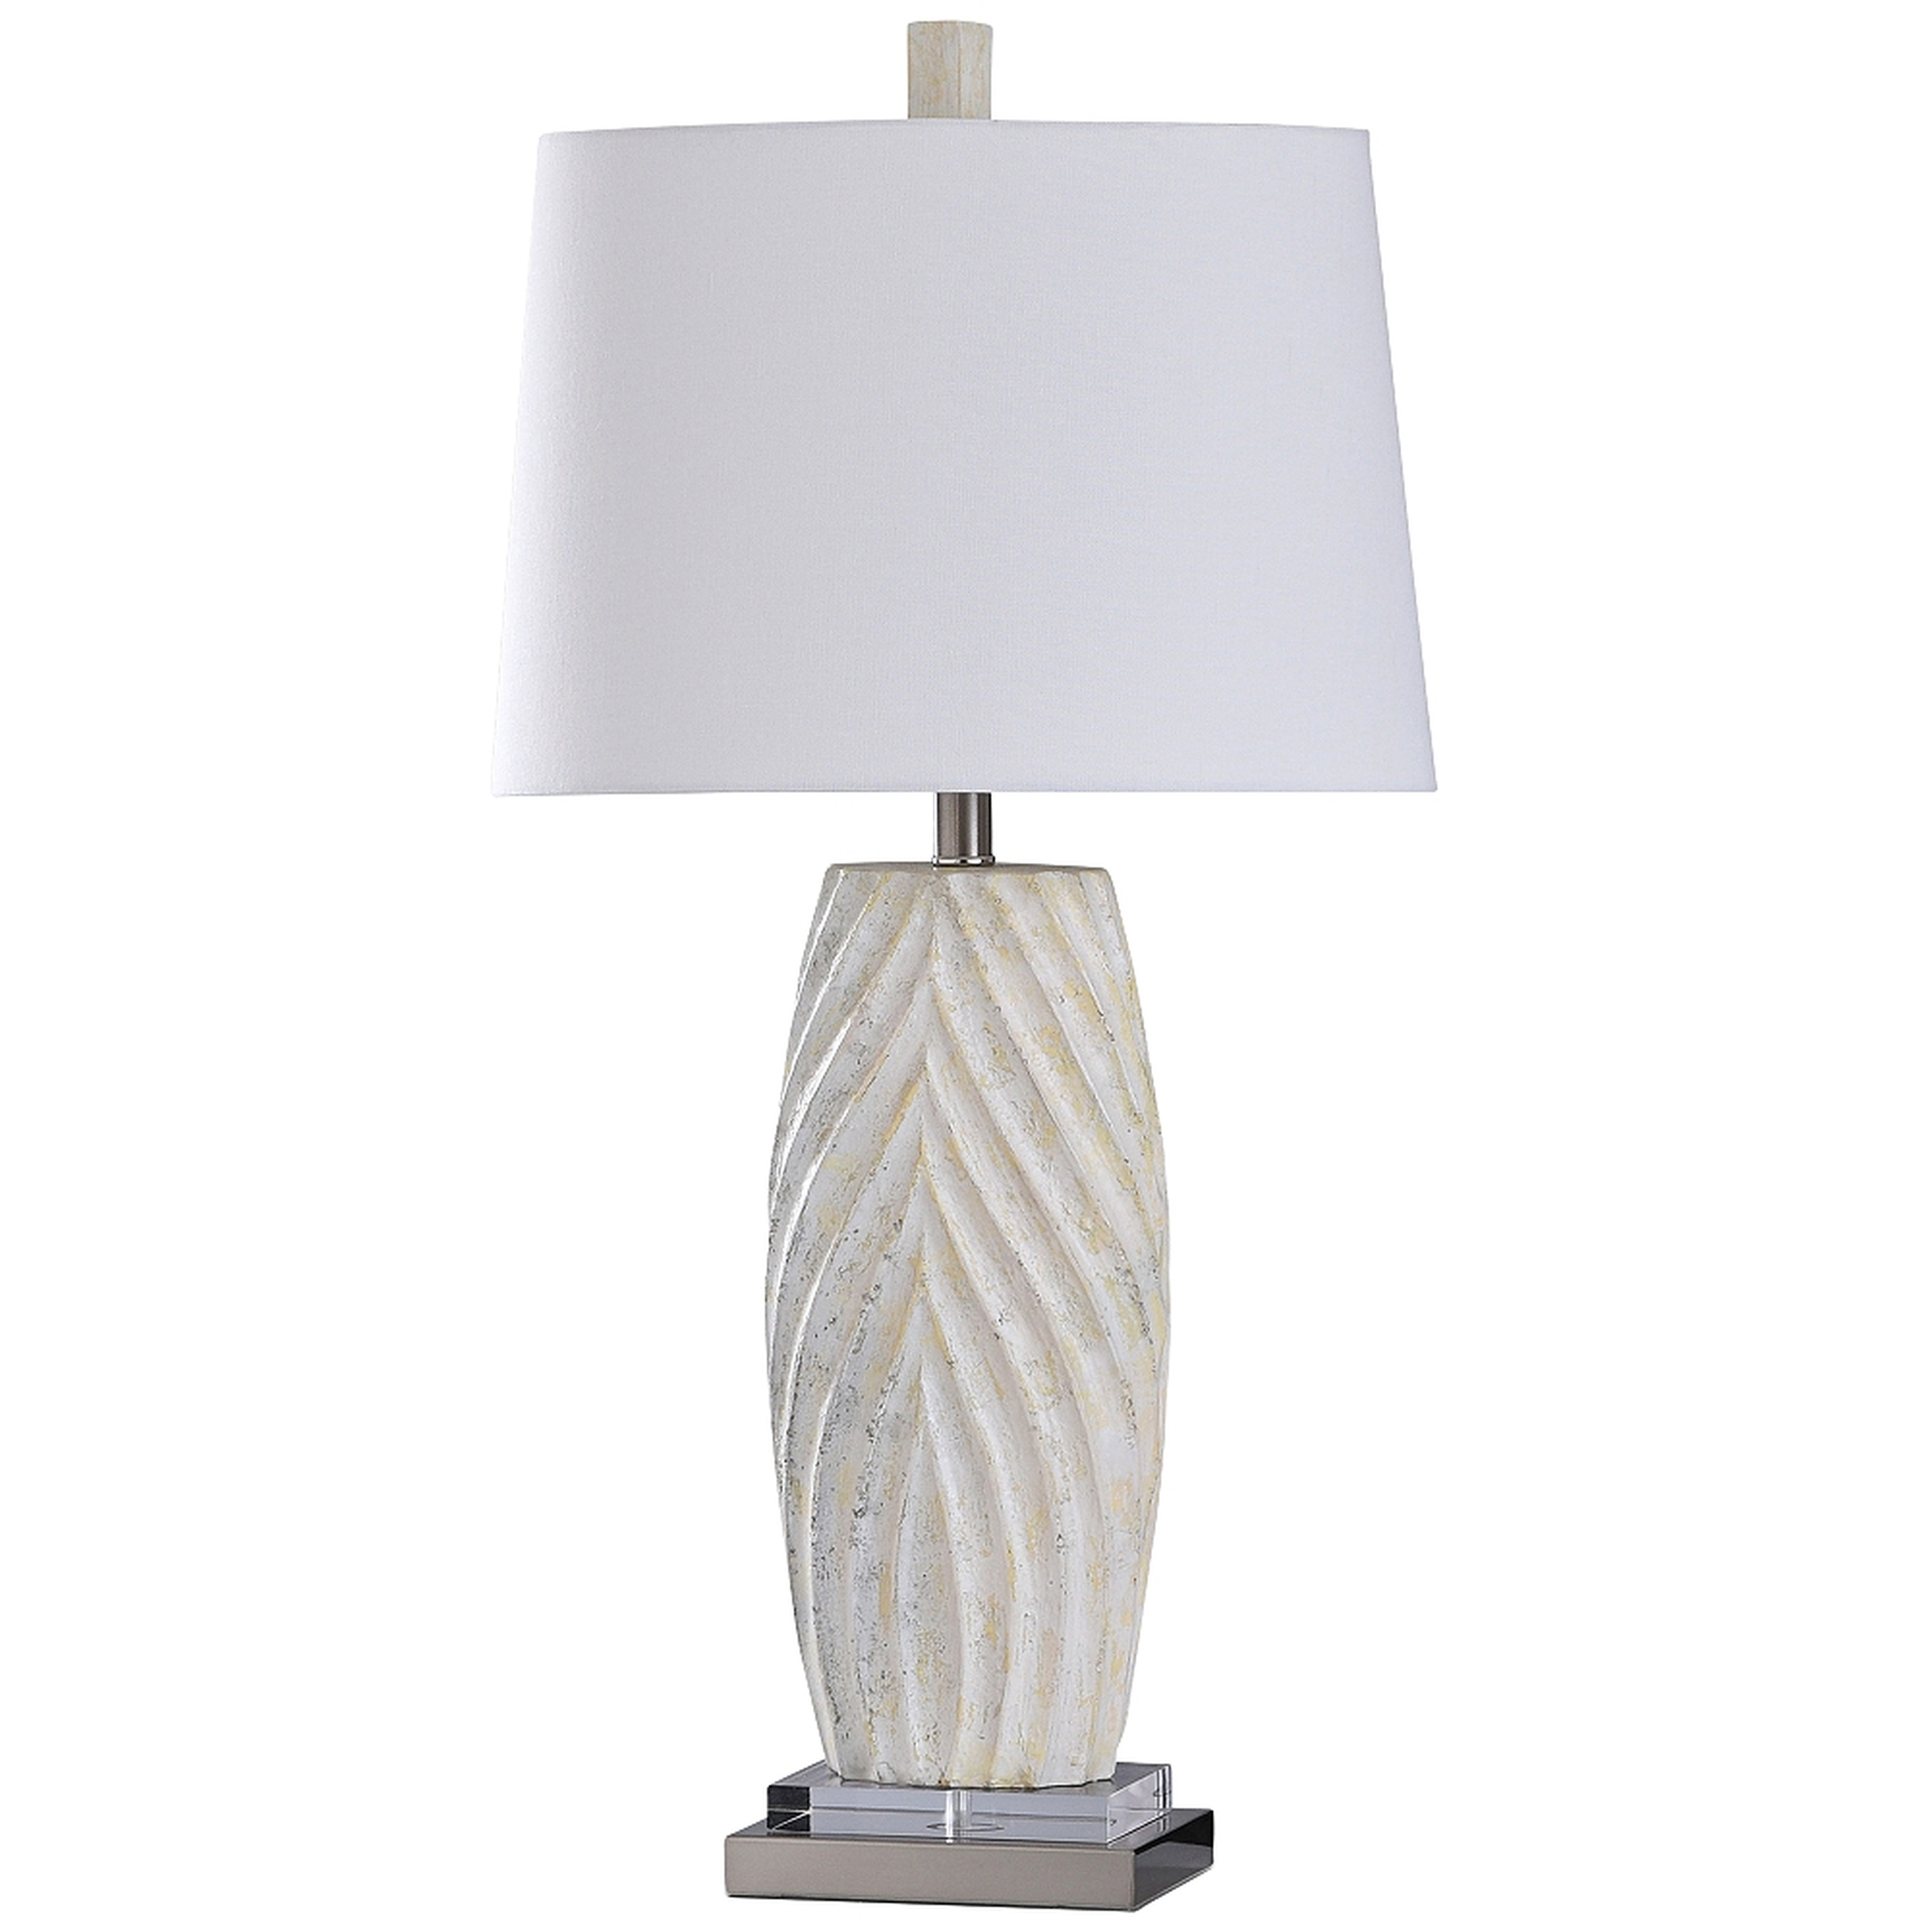 Brie White Sand Painted Vase Table Lamp - Style # 94C70 - Lamps Plus